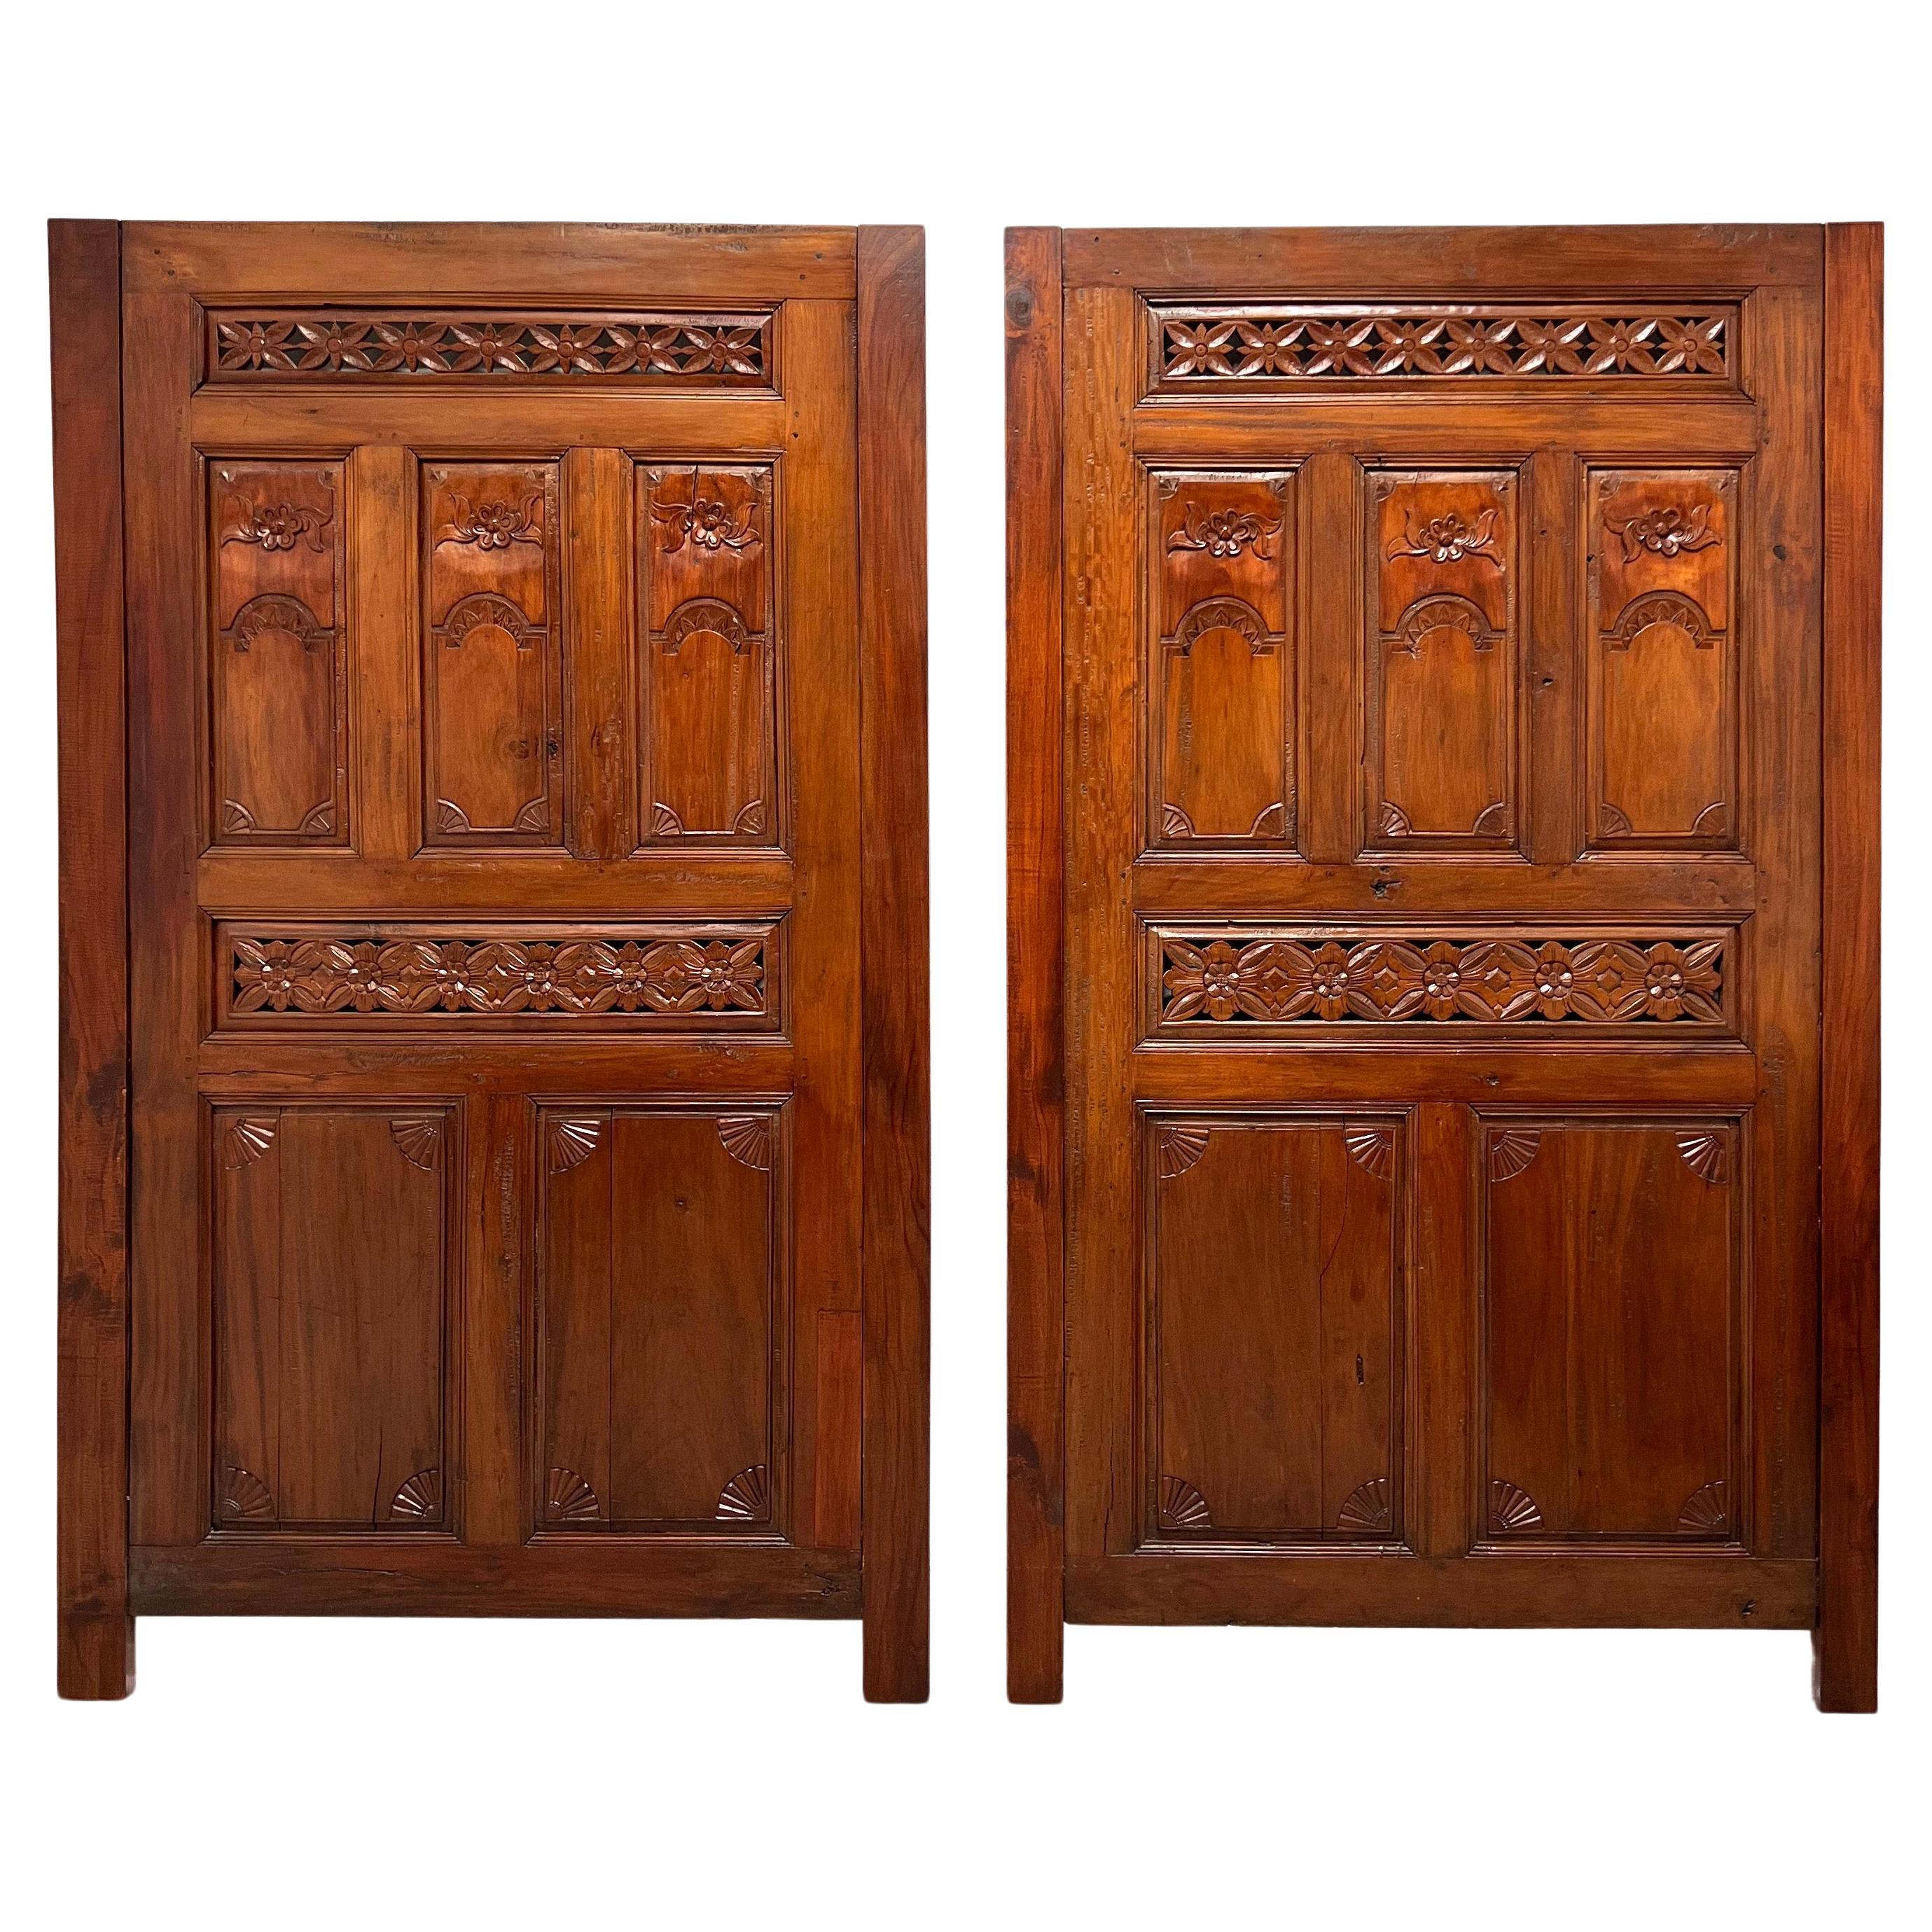 20th Century Carved Balinese Mahogany Doors Converted to Headboards - Pair For Sale